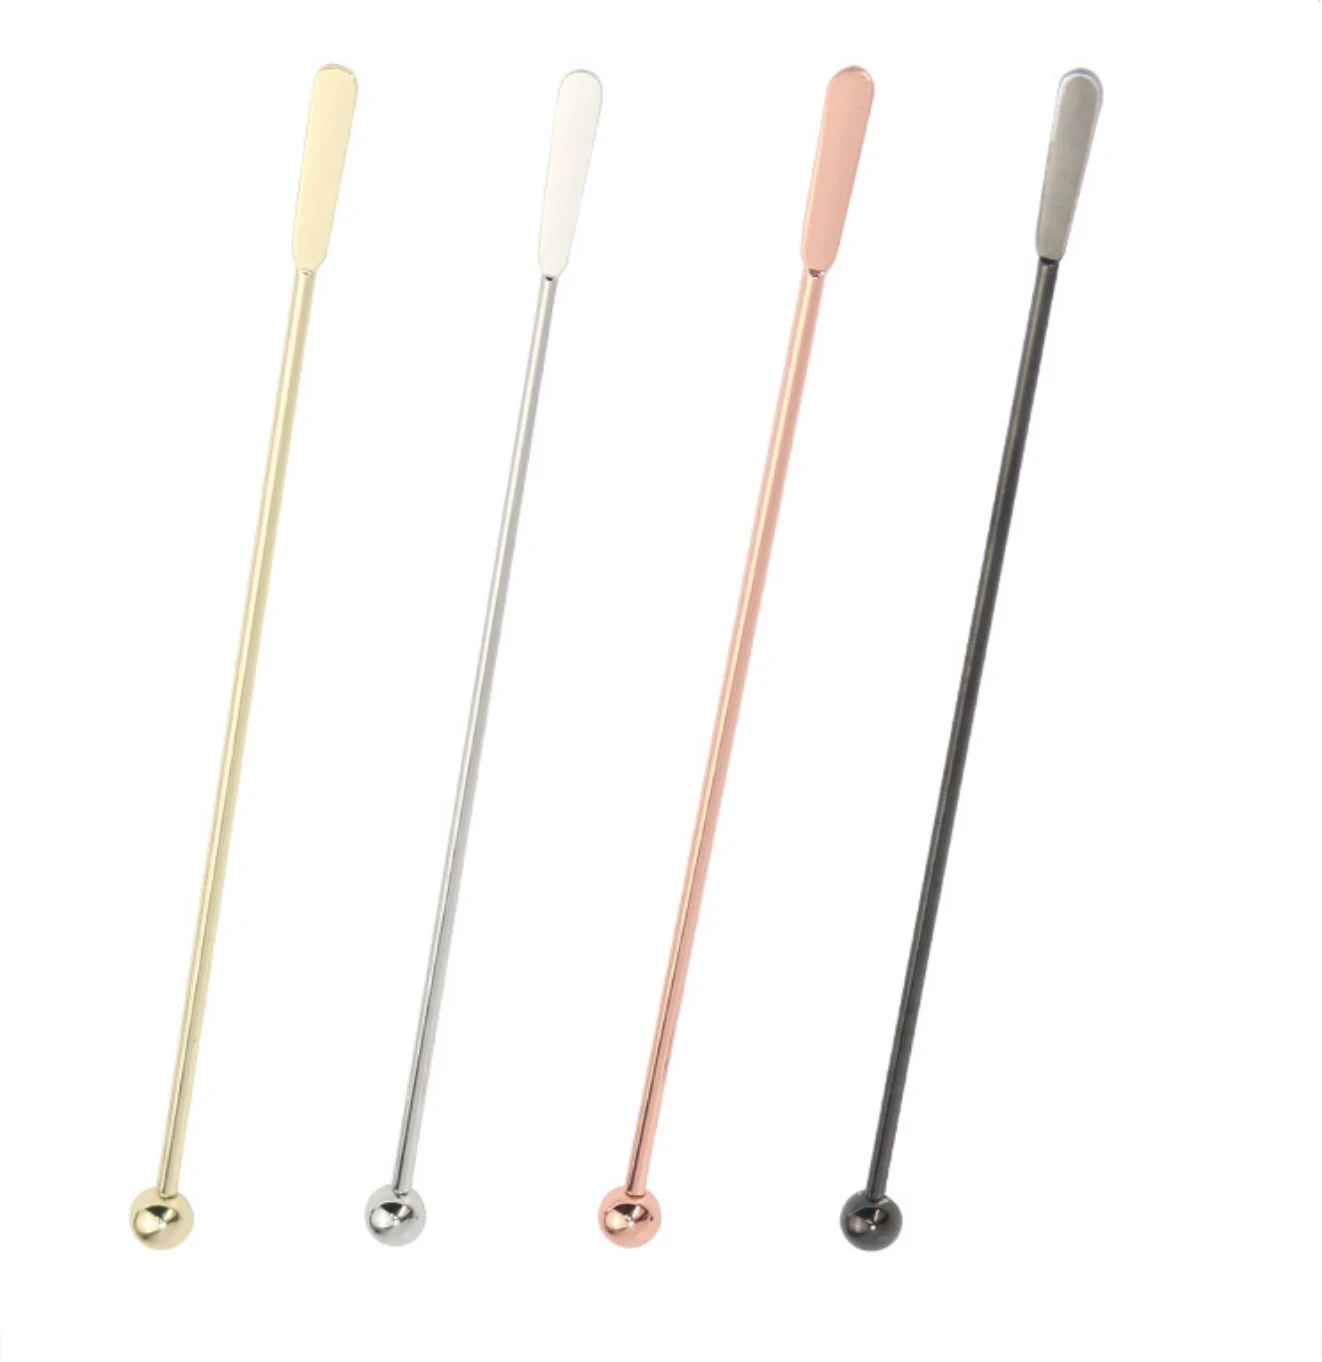 Stainless Steel Bar Coffee Beverage Stirrers Cocktail Swizzle Stick Tool A 